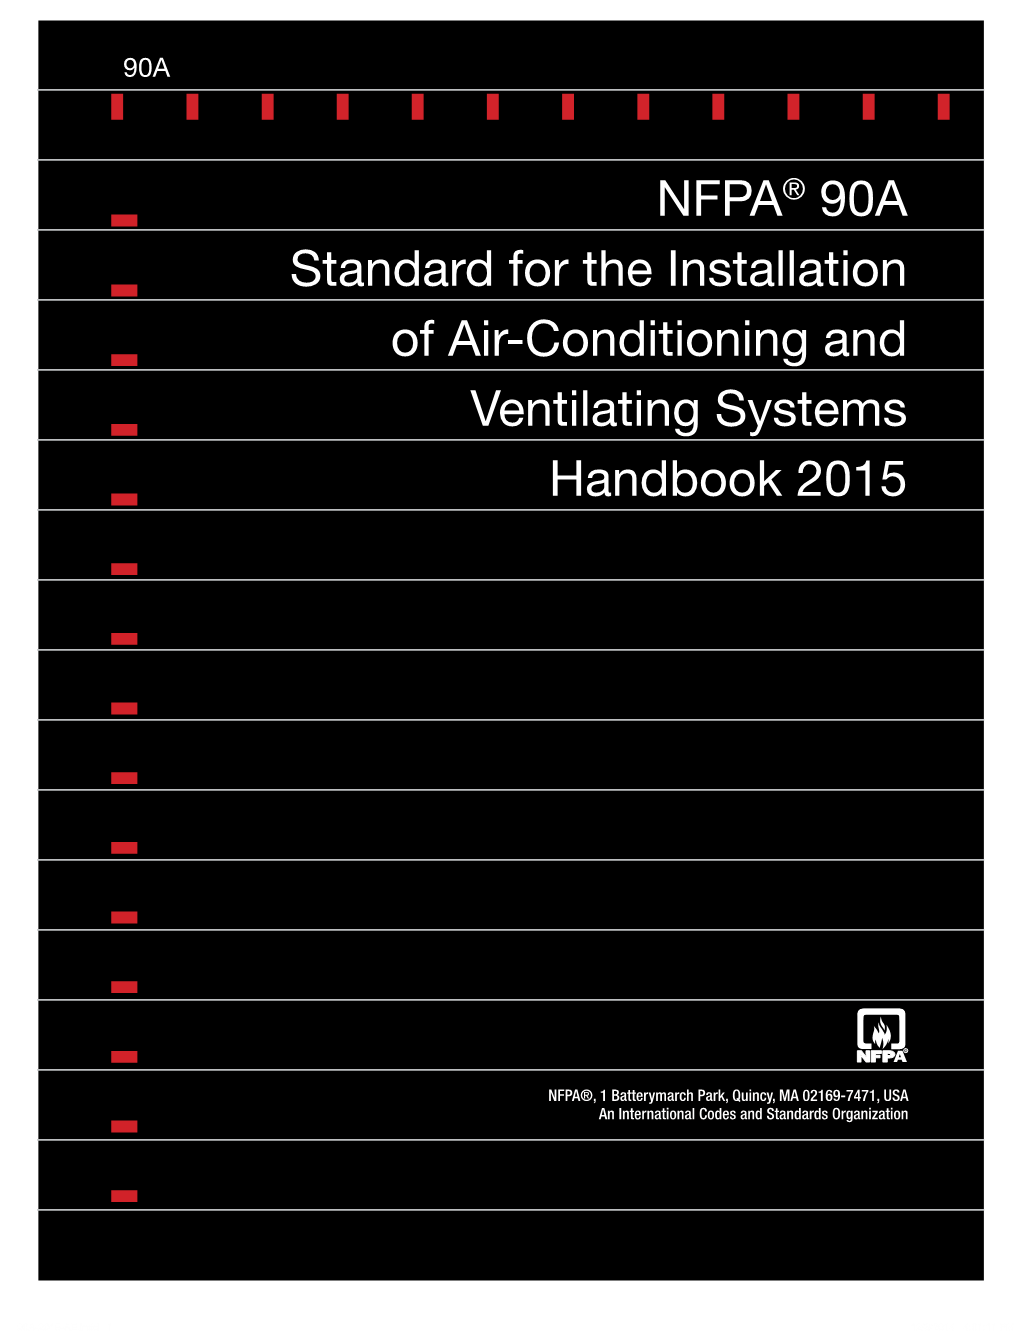 NFPA® 90A Standard for the Installation of Air-Conditioning and Ventilating Systems Handbook 2015